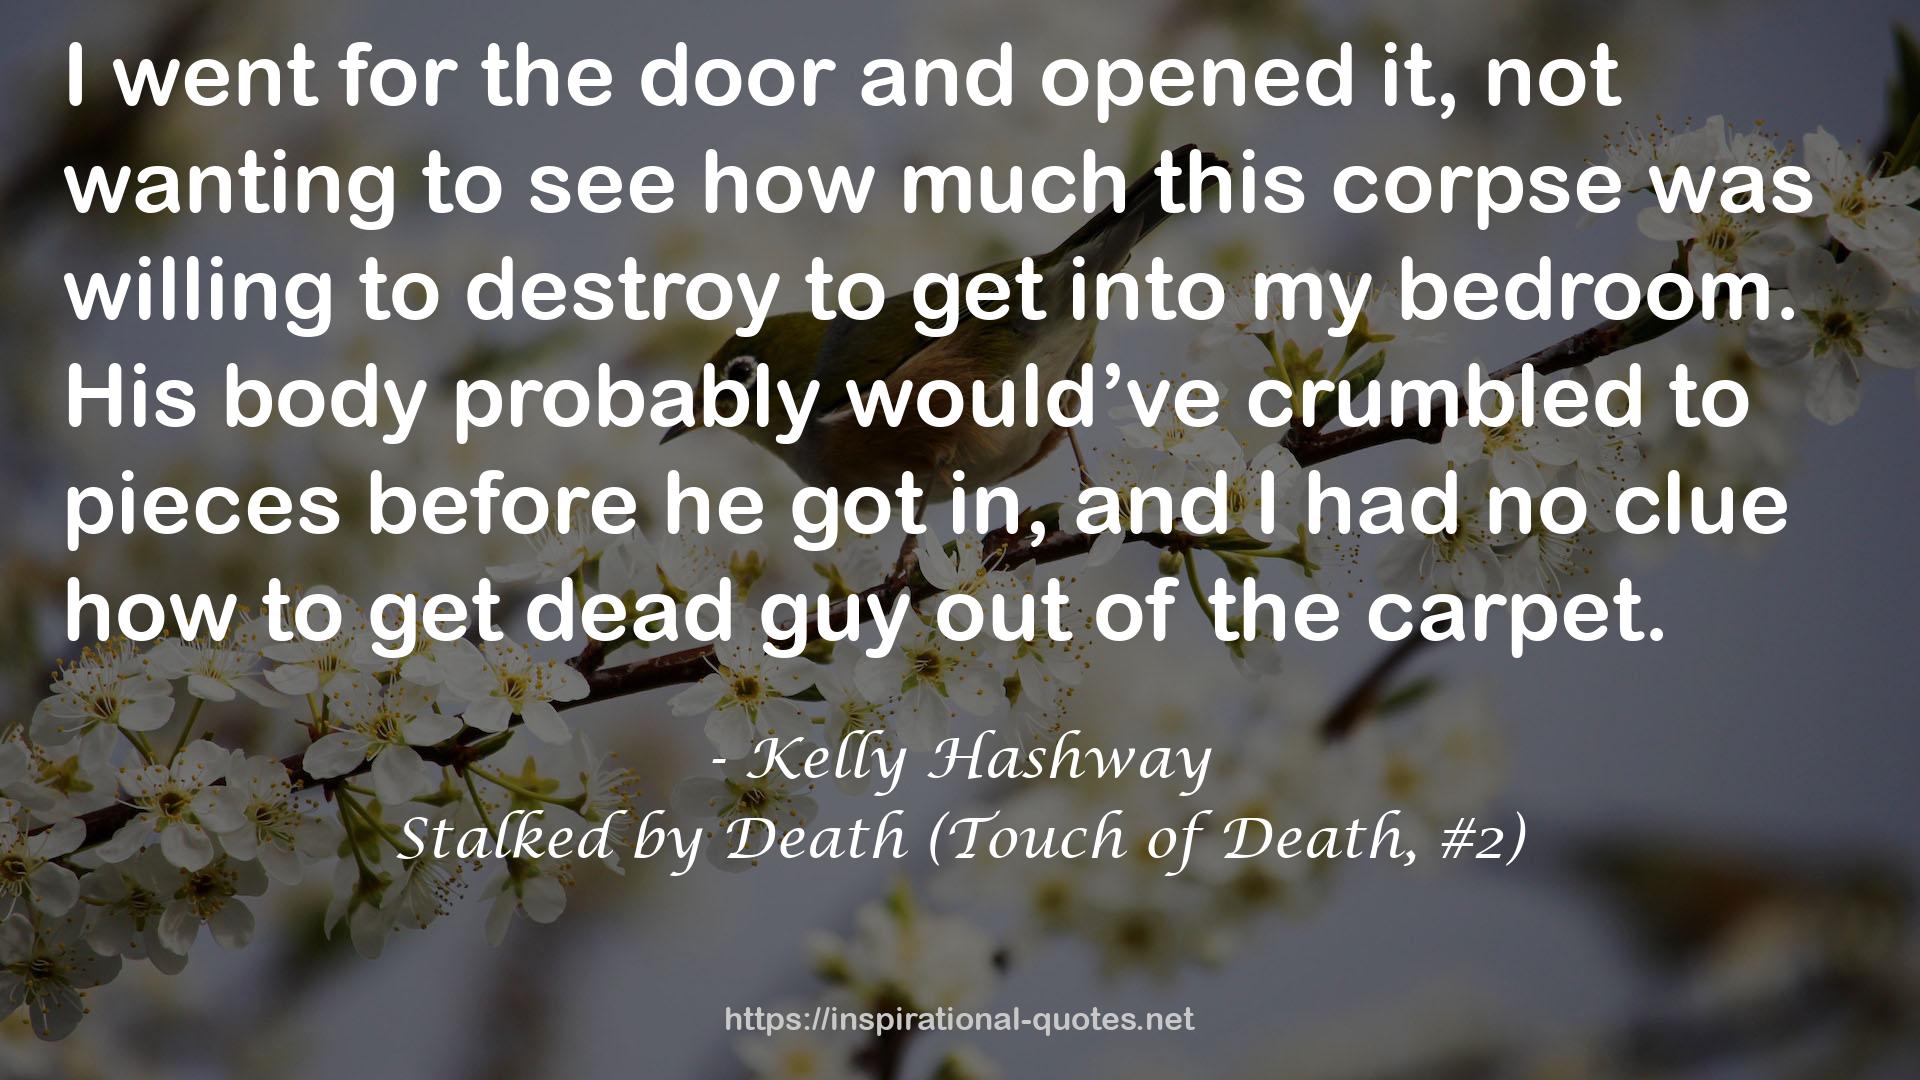 Stalked by Death (Touch of Death, #2) QUOTES